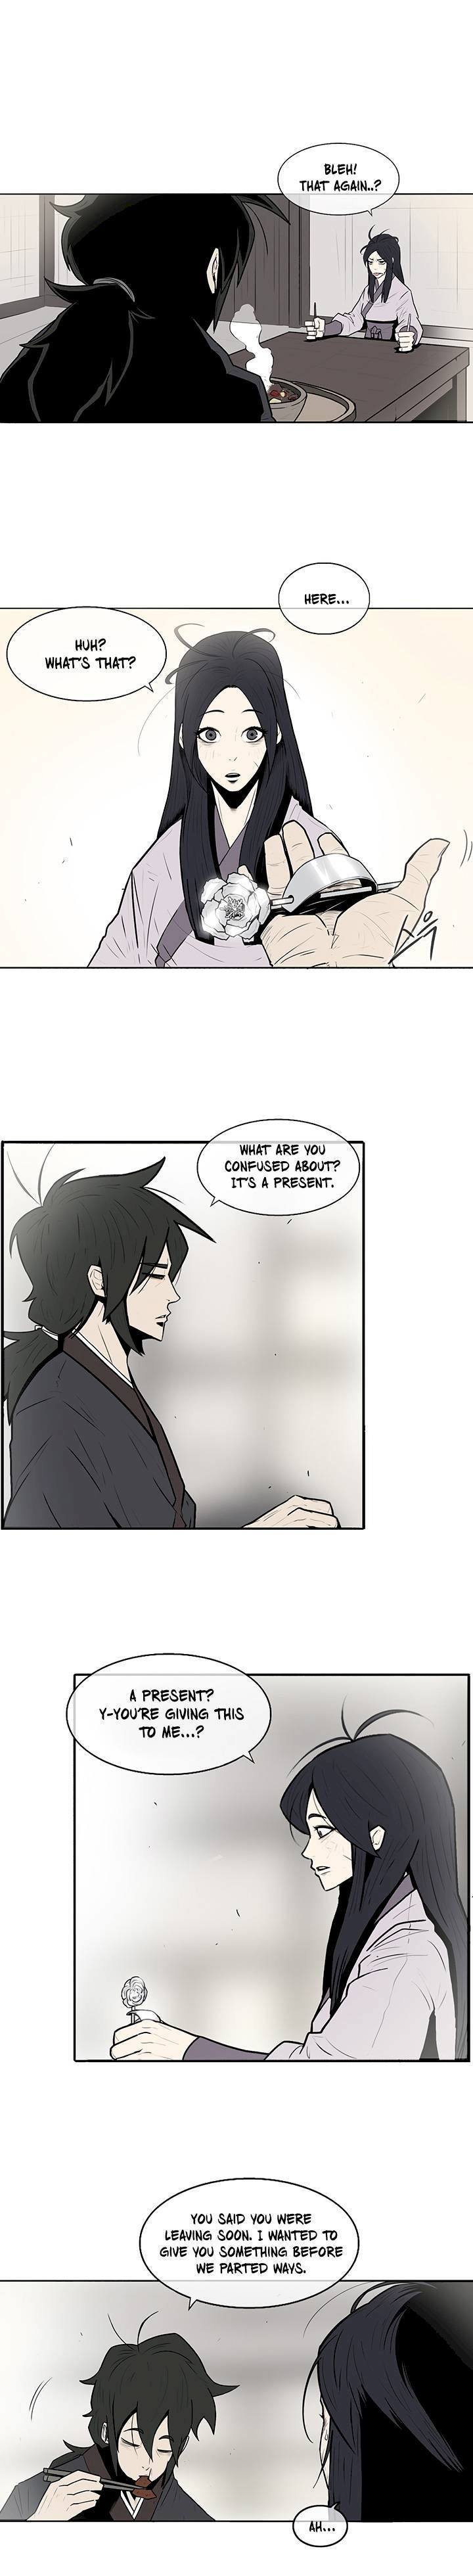 legend-of-the-northern-blade-chap-8-9